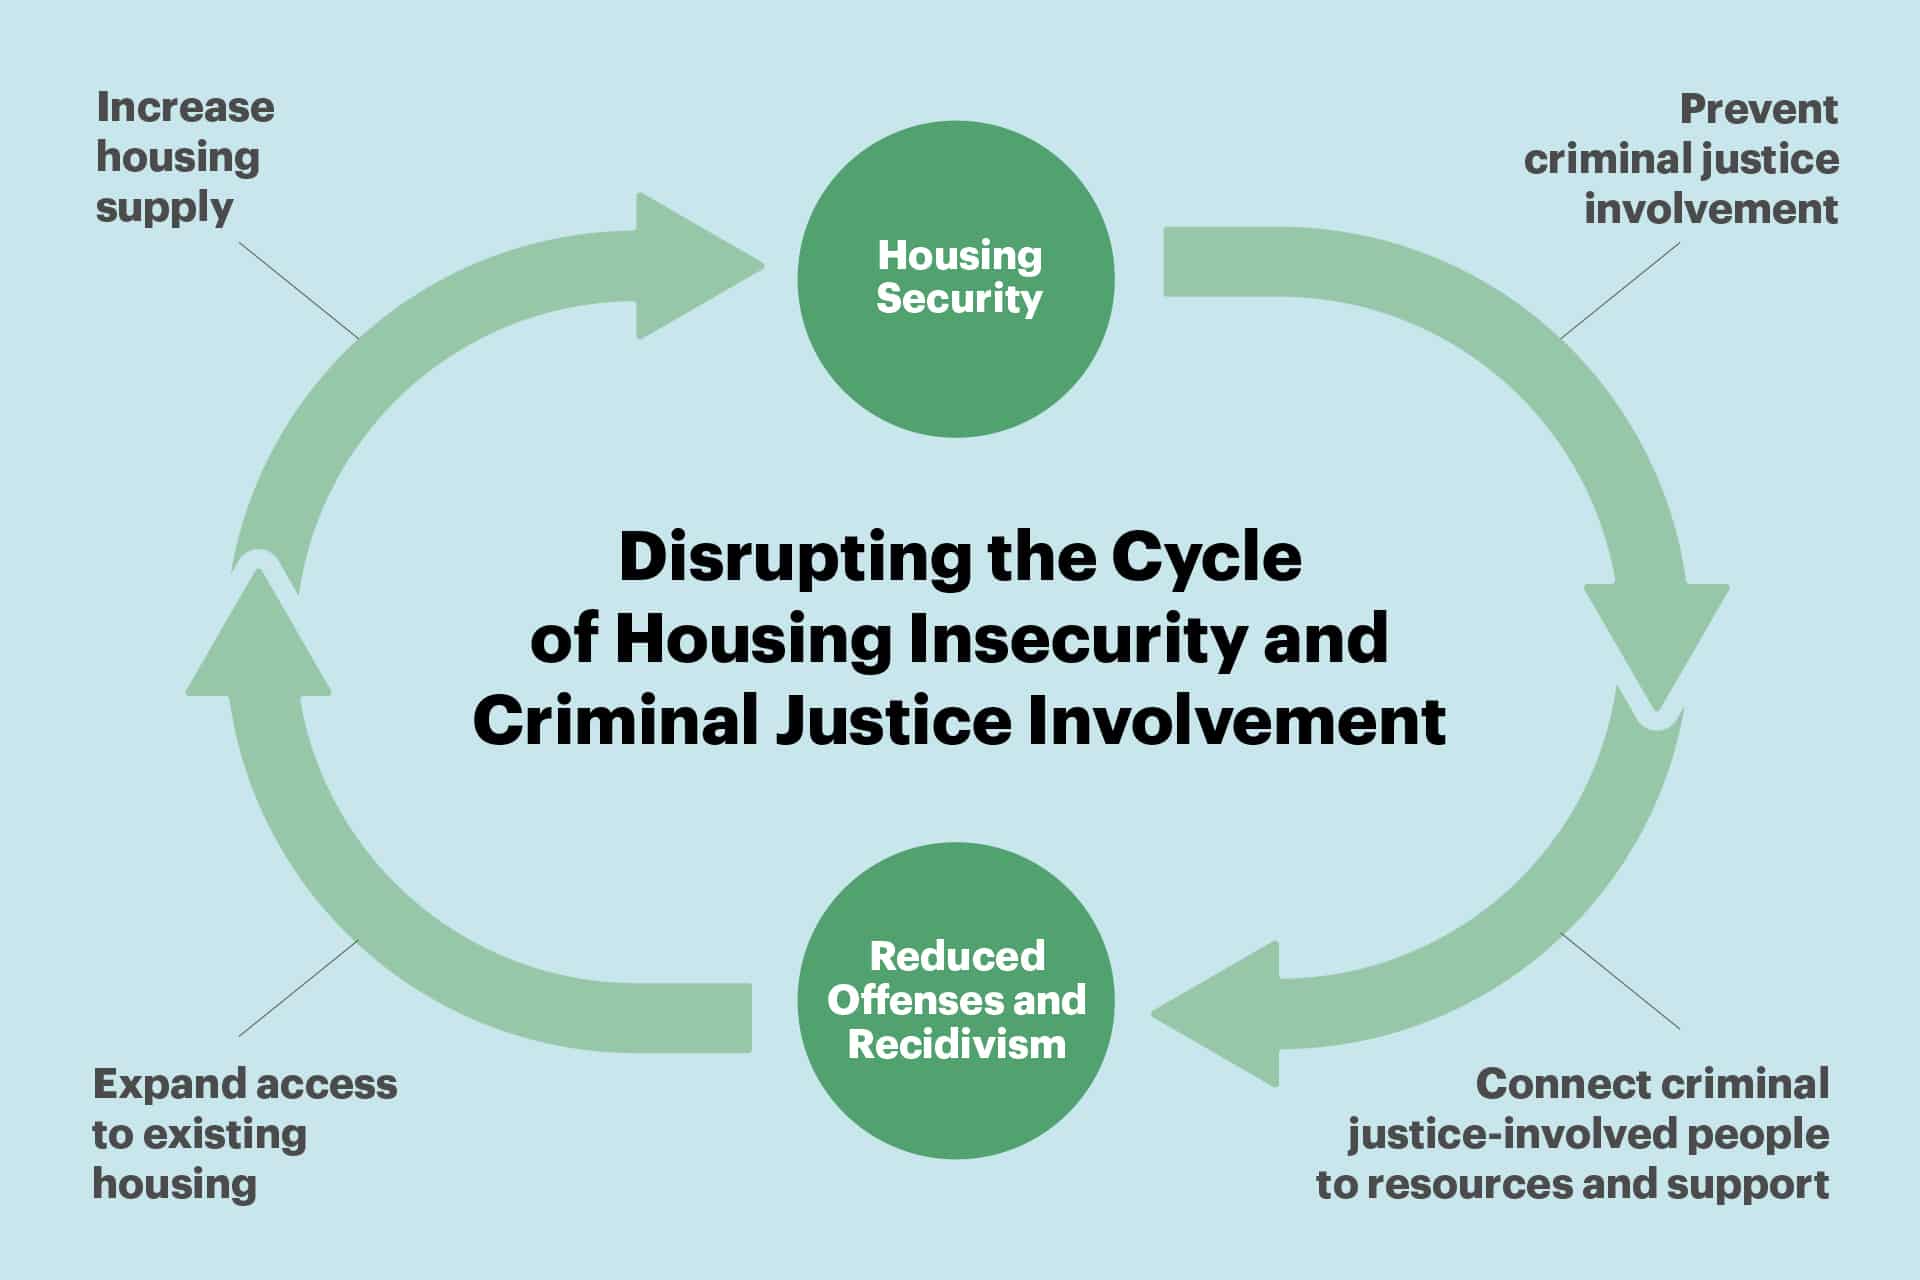 Disrupting the cycle of housing insecurity and criminal justice involvement